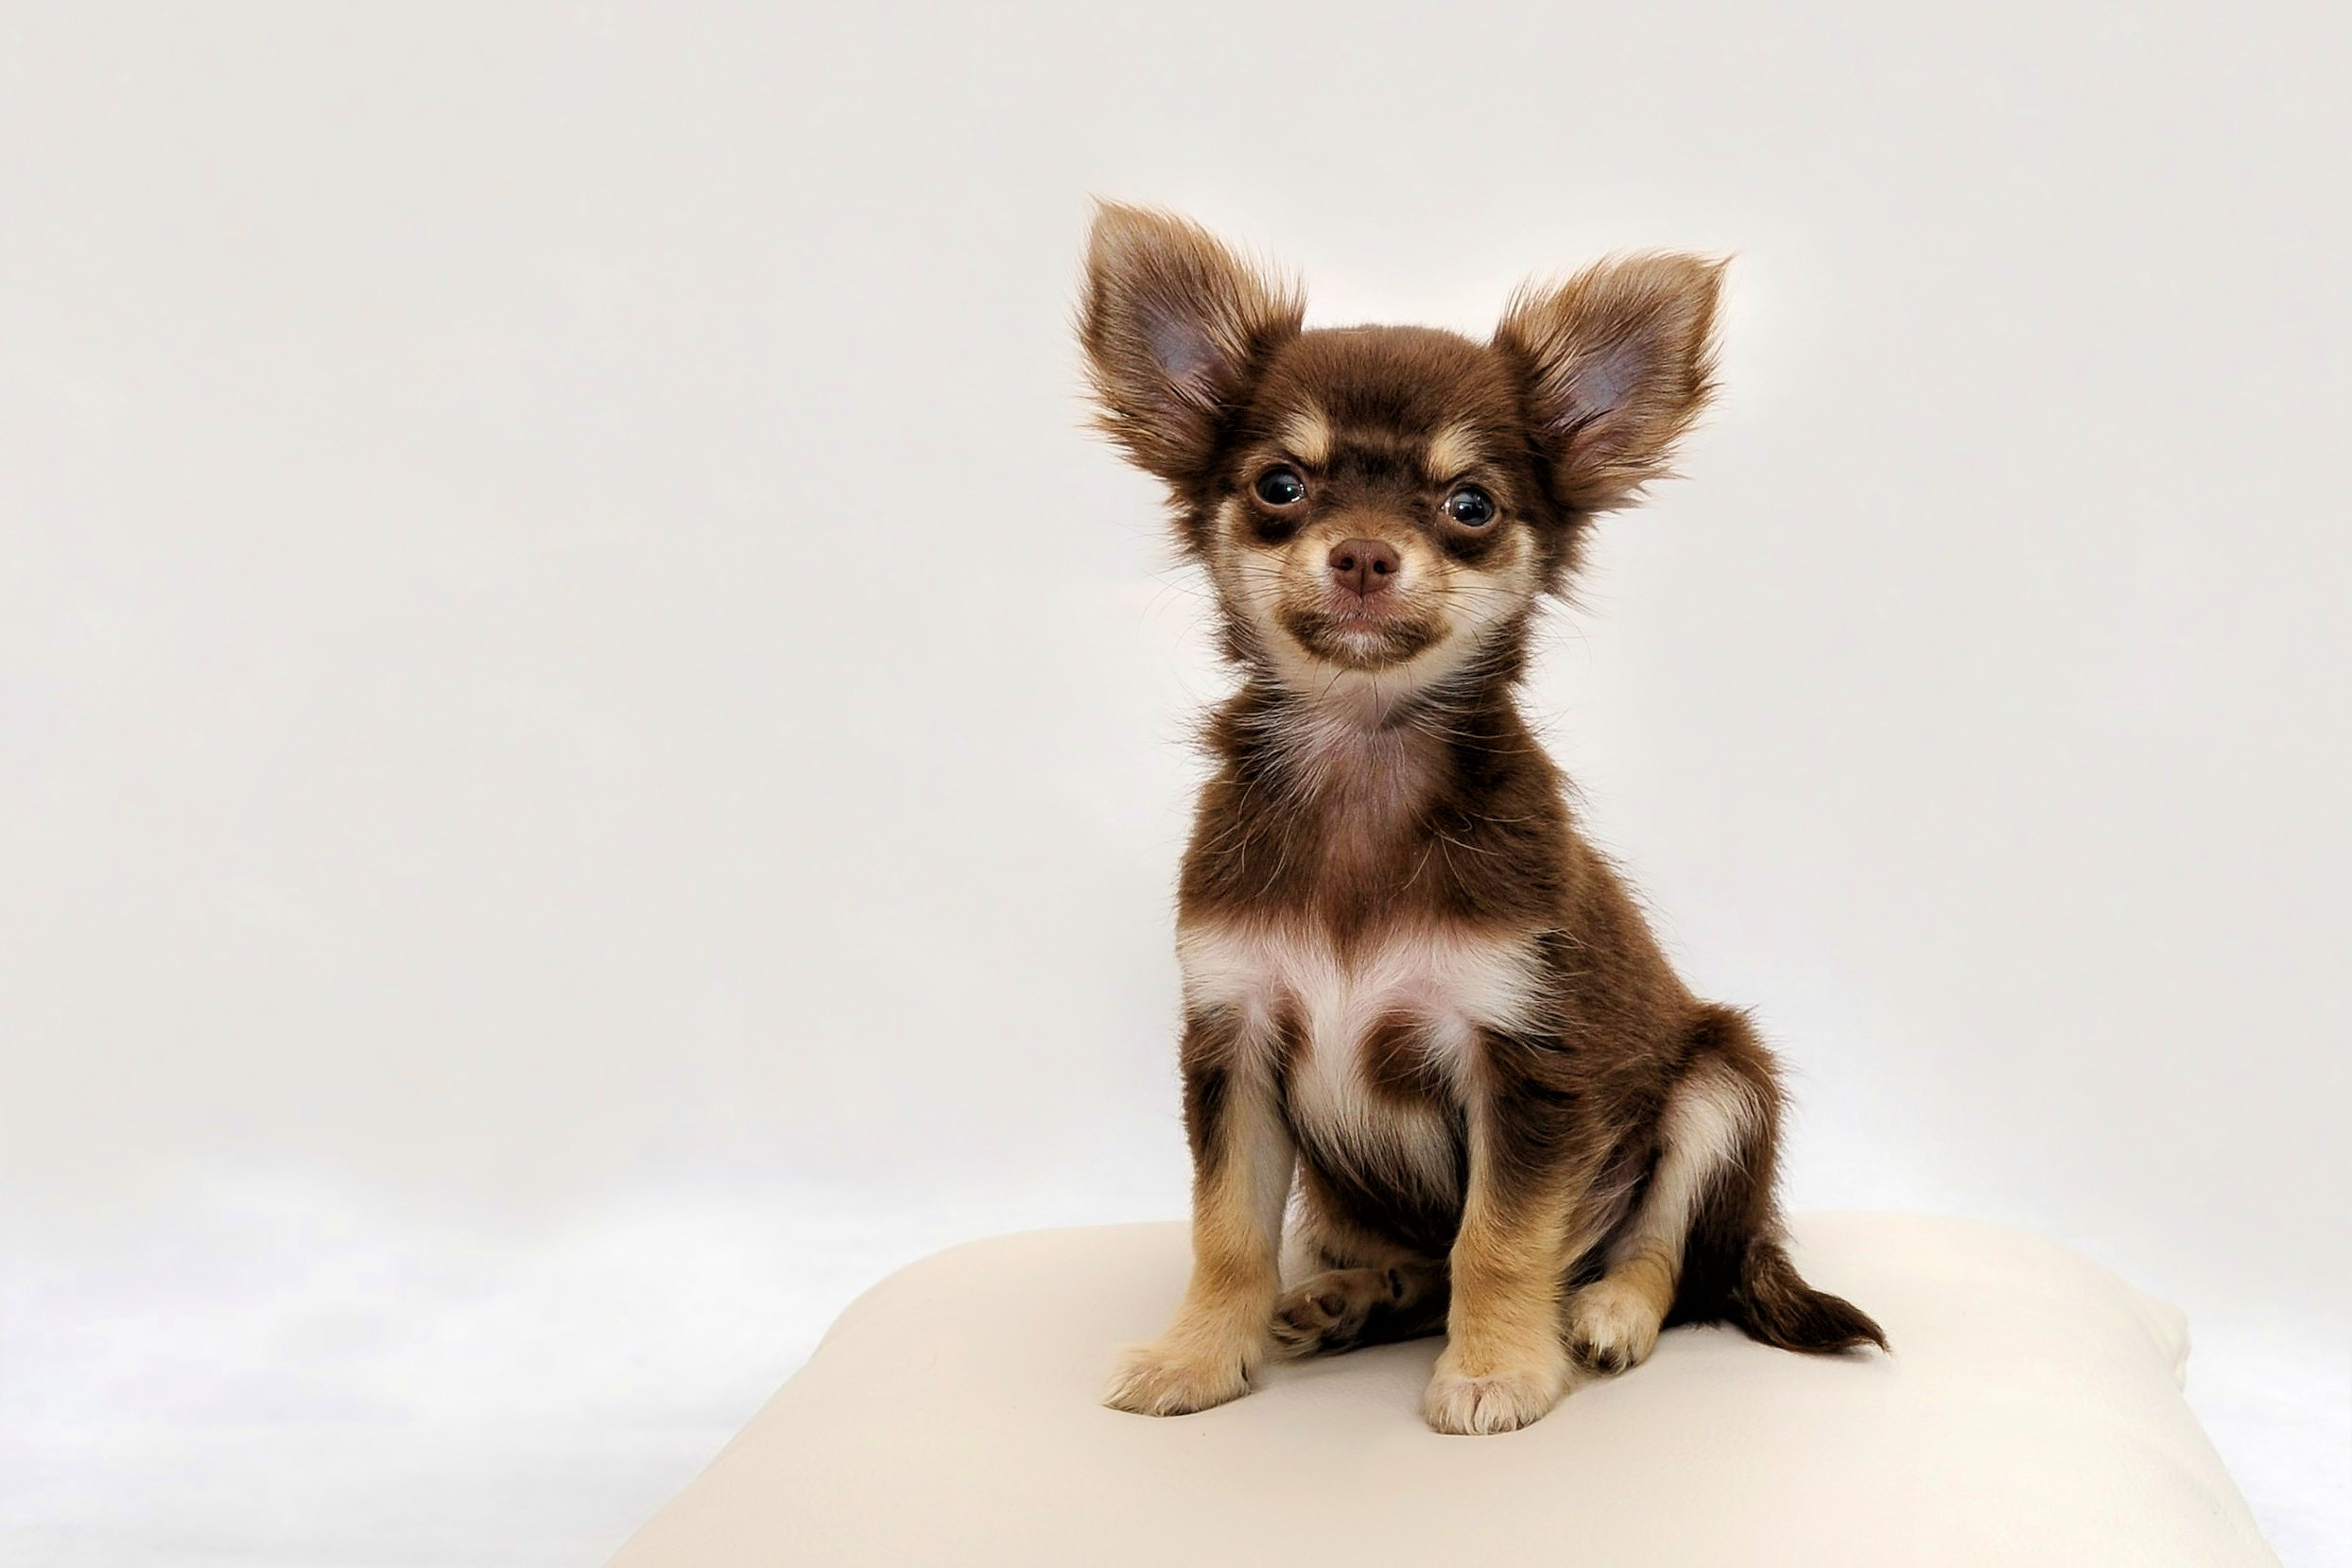 A Chihuahua sitting on a cushion against a white background